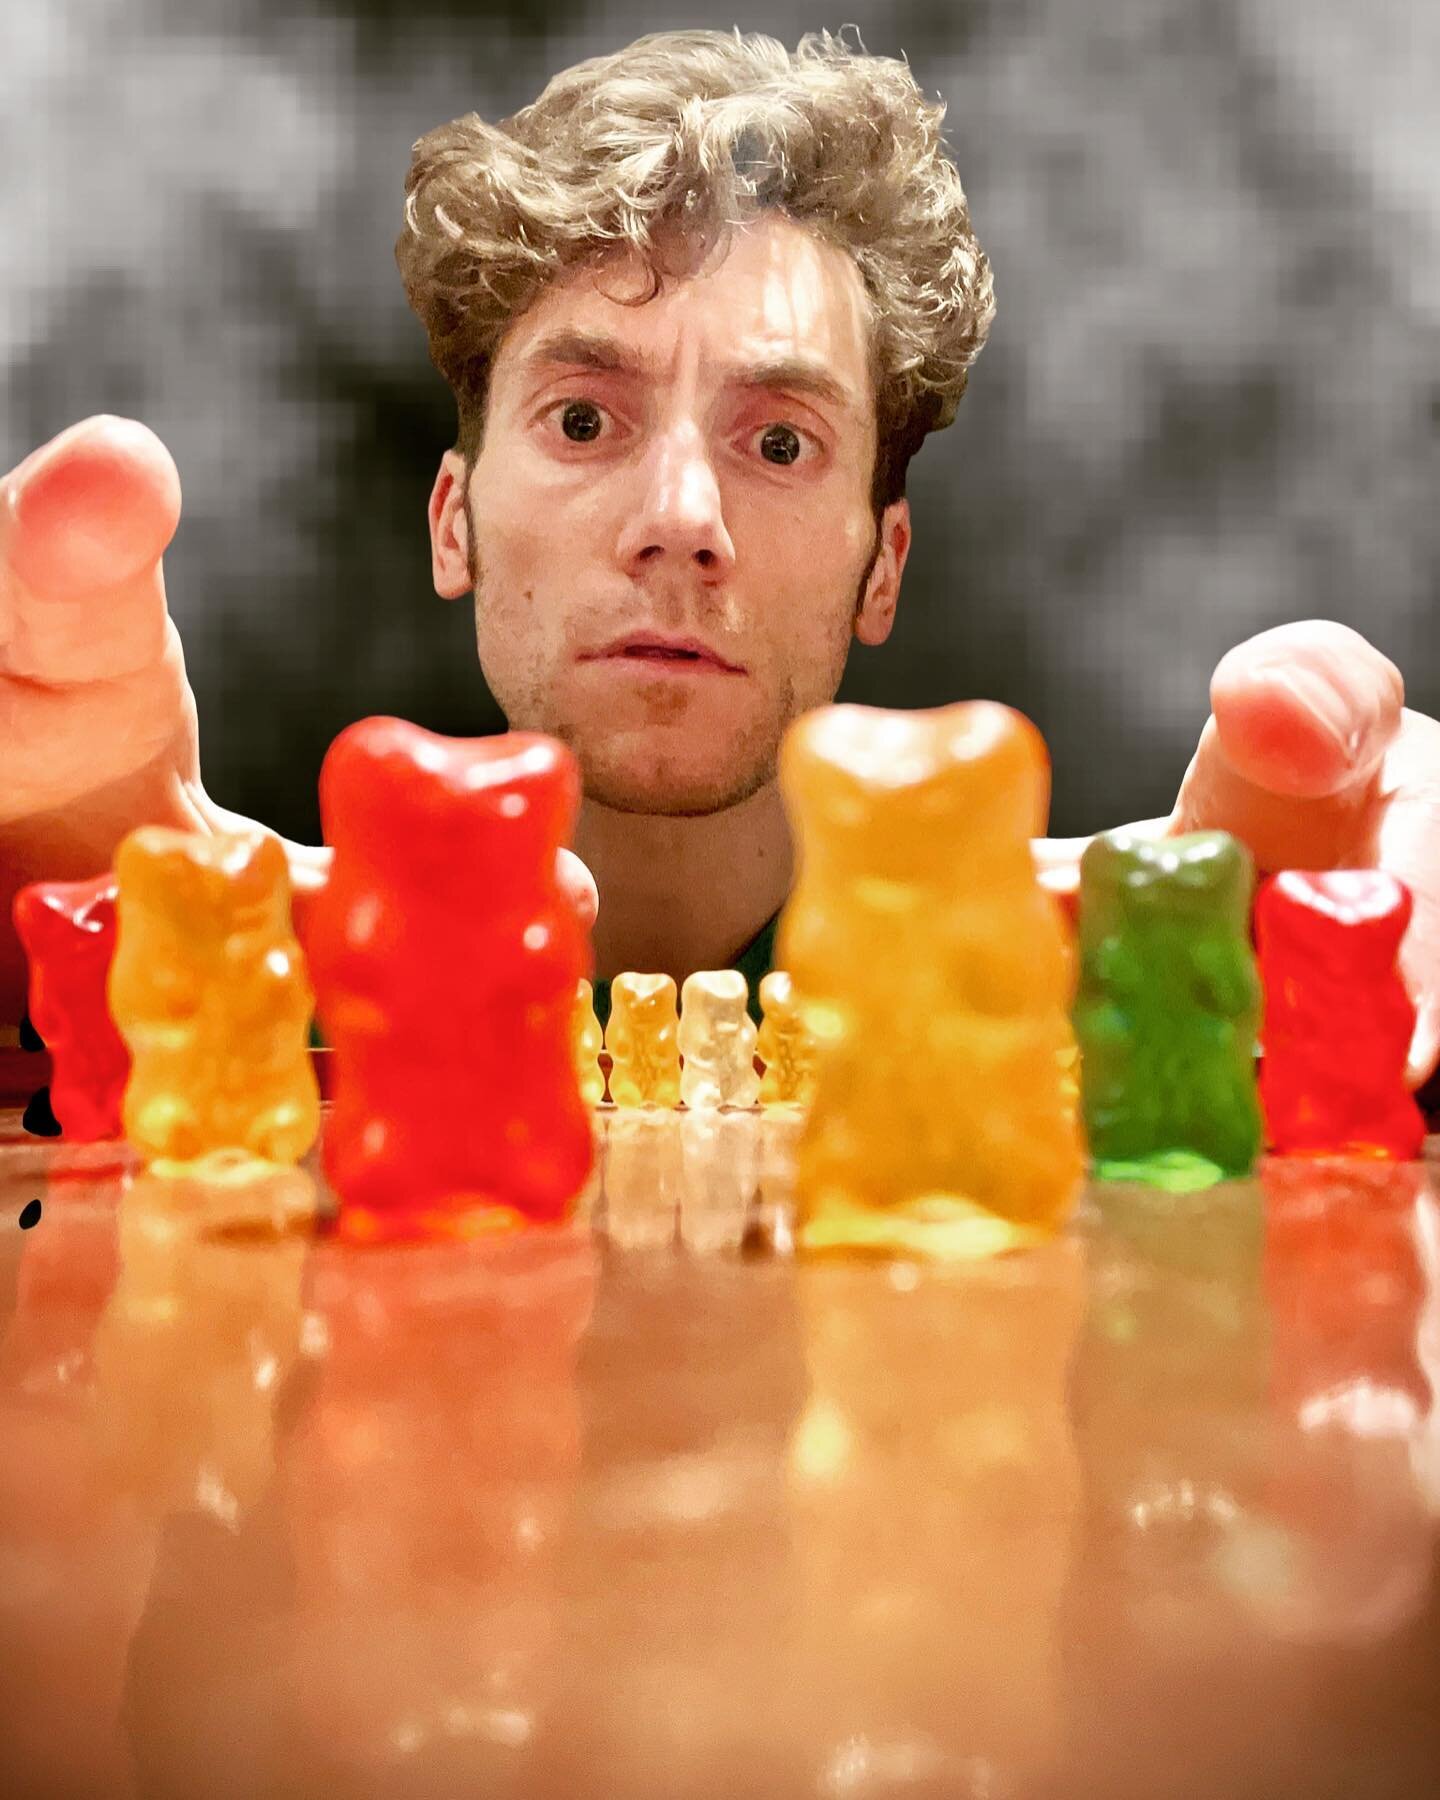 Bravery in the face of sugar free gummy bears

You're all sickos. YOU KNOW WHO YOU ARE. You love reading about gummy bear-induced diarrhea, so here I am with Me, You, and Meme Reviews REVISITED. 

Once more plunging into the sugar alcohol sickness, p